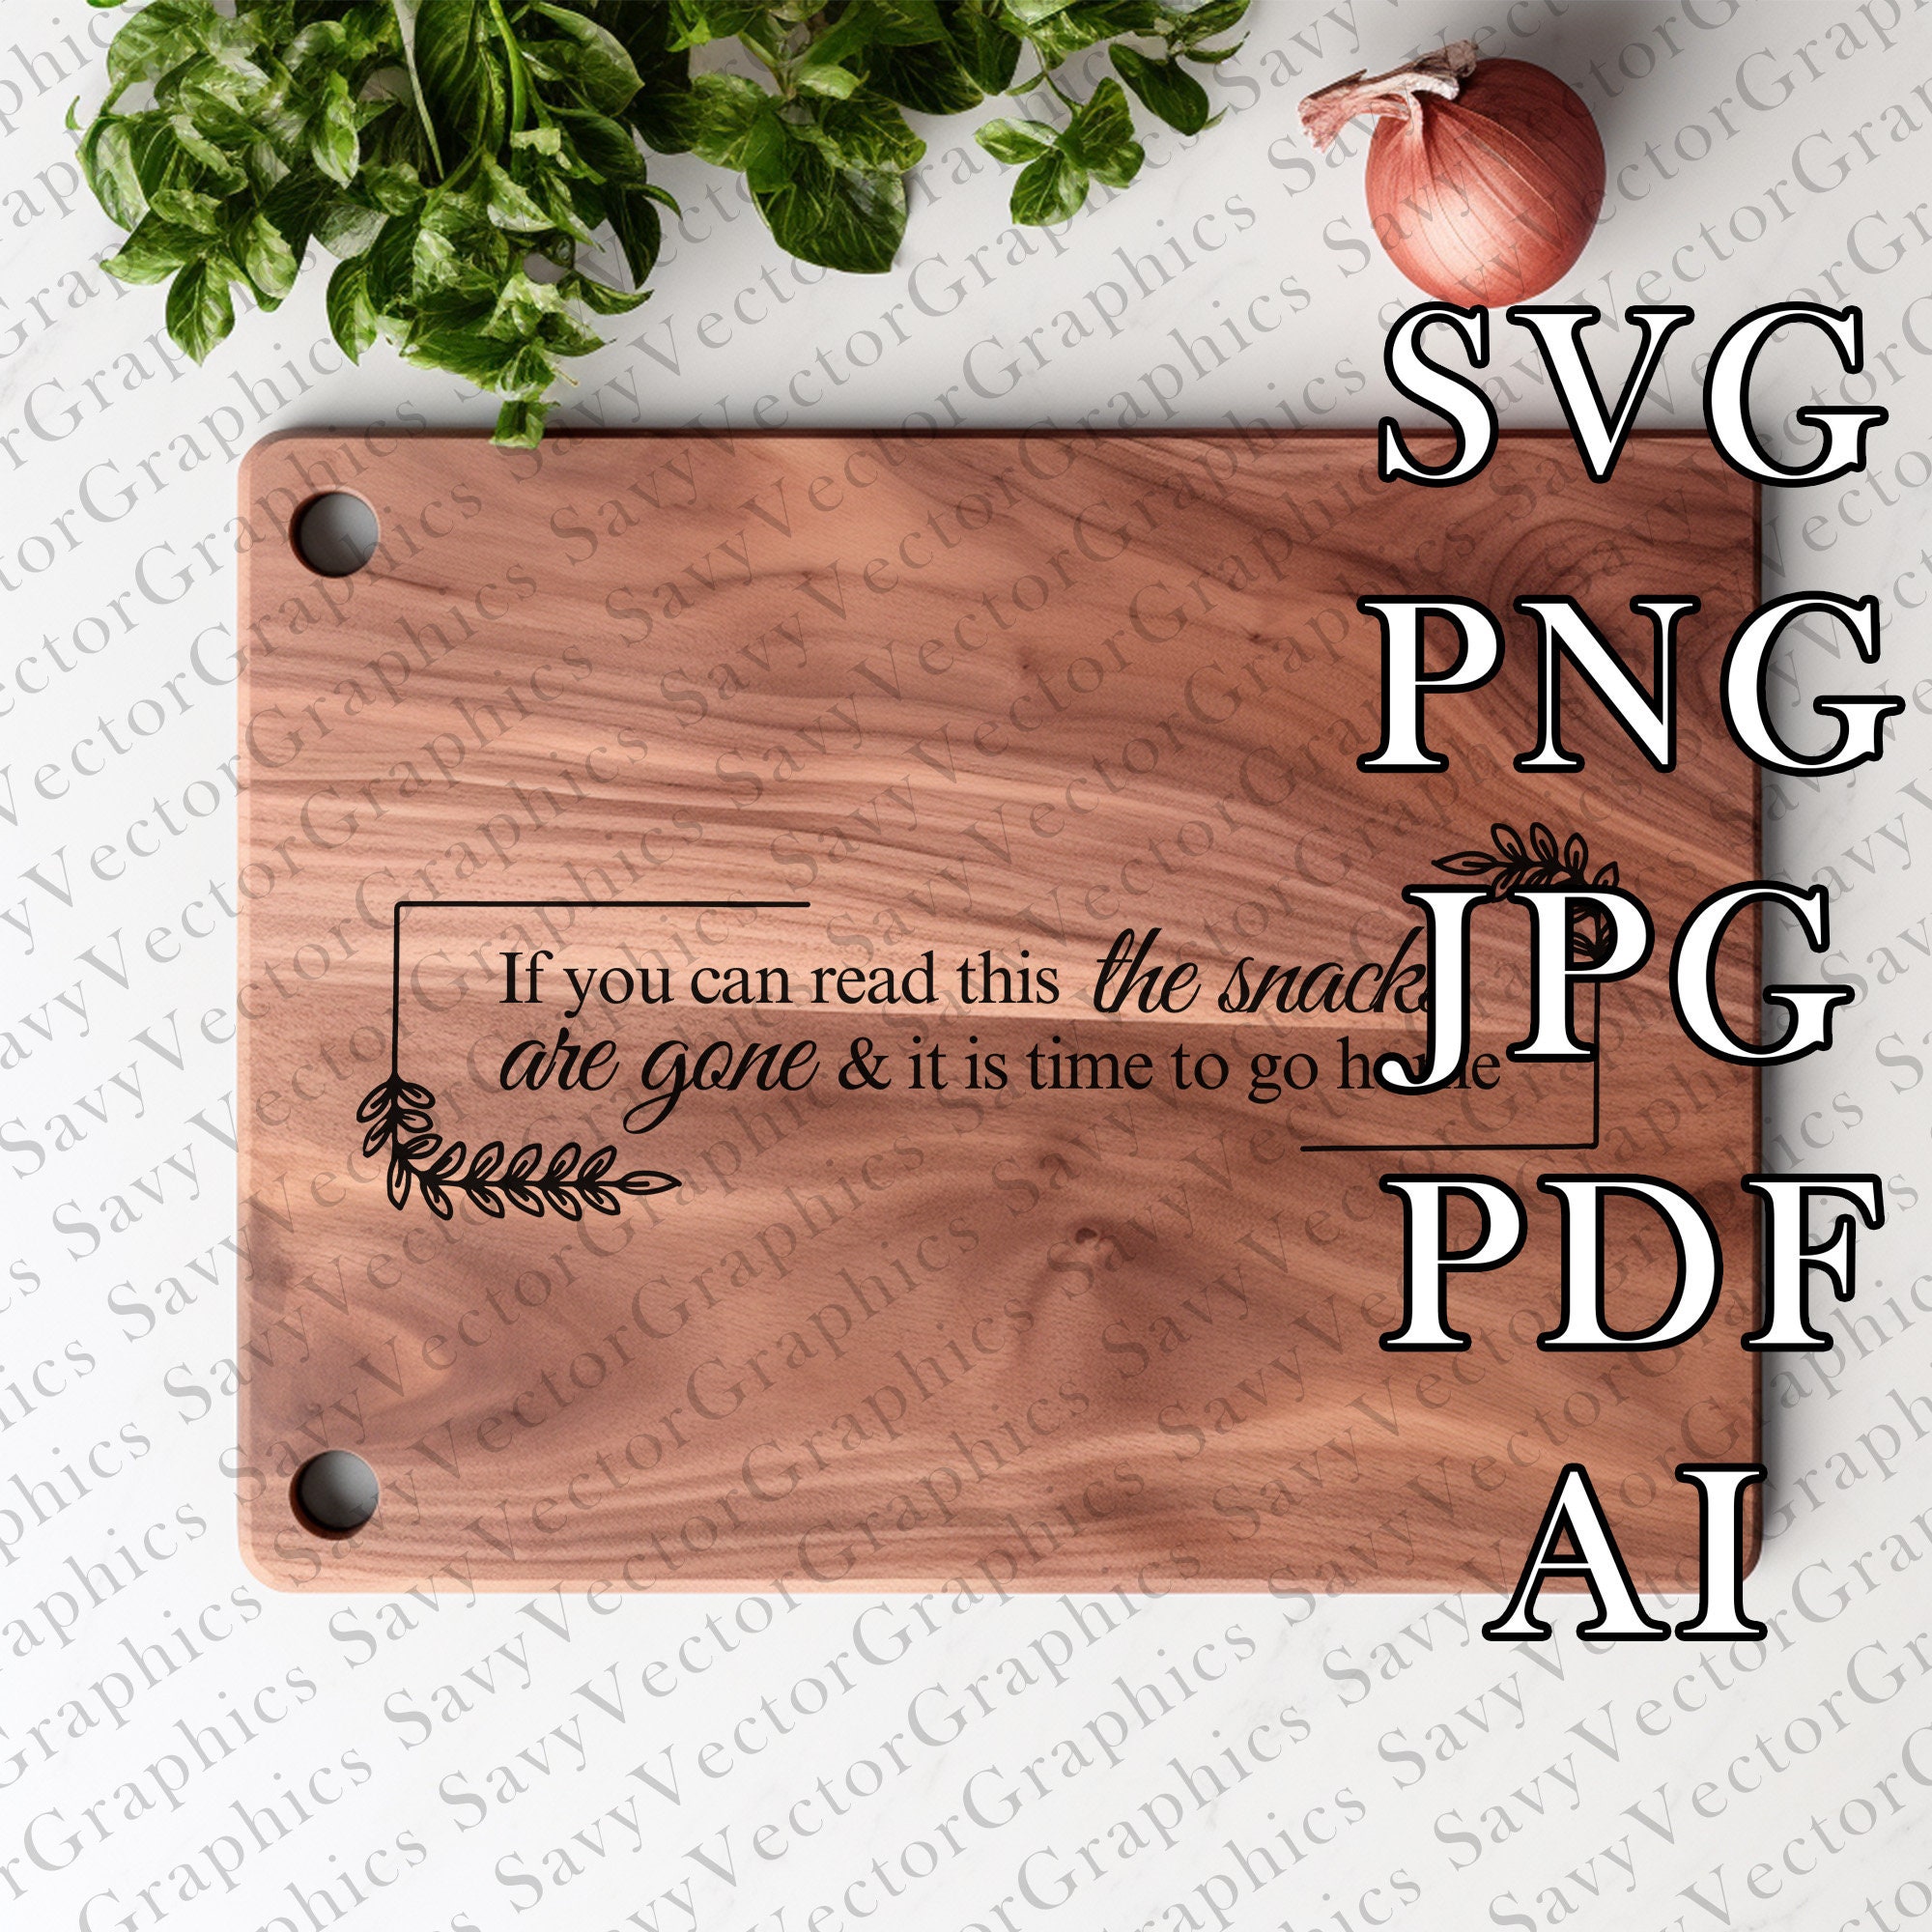 Funny Gifts For Chefs - Words with Boards, LLC